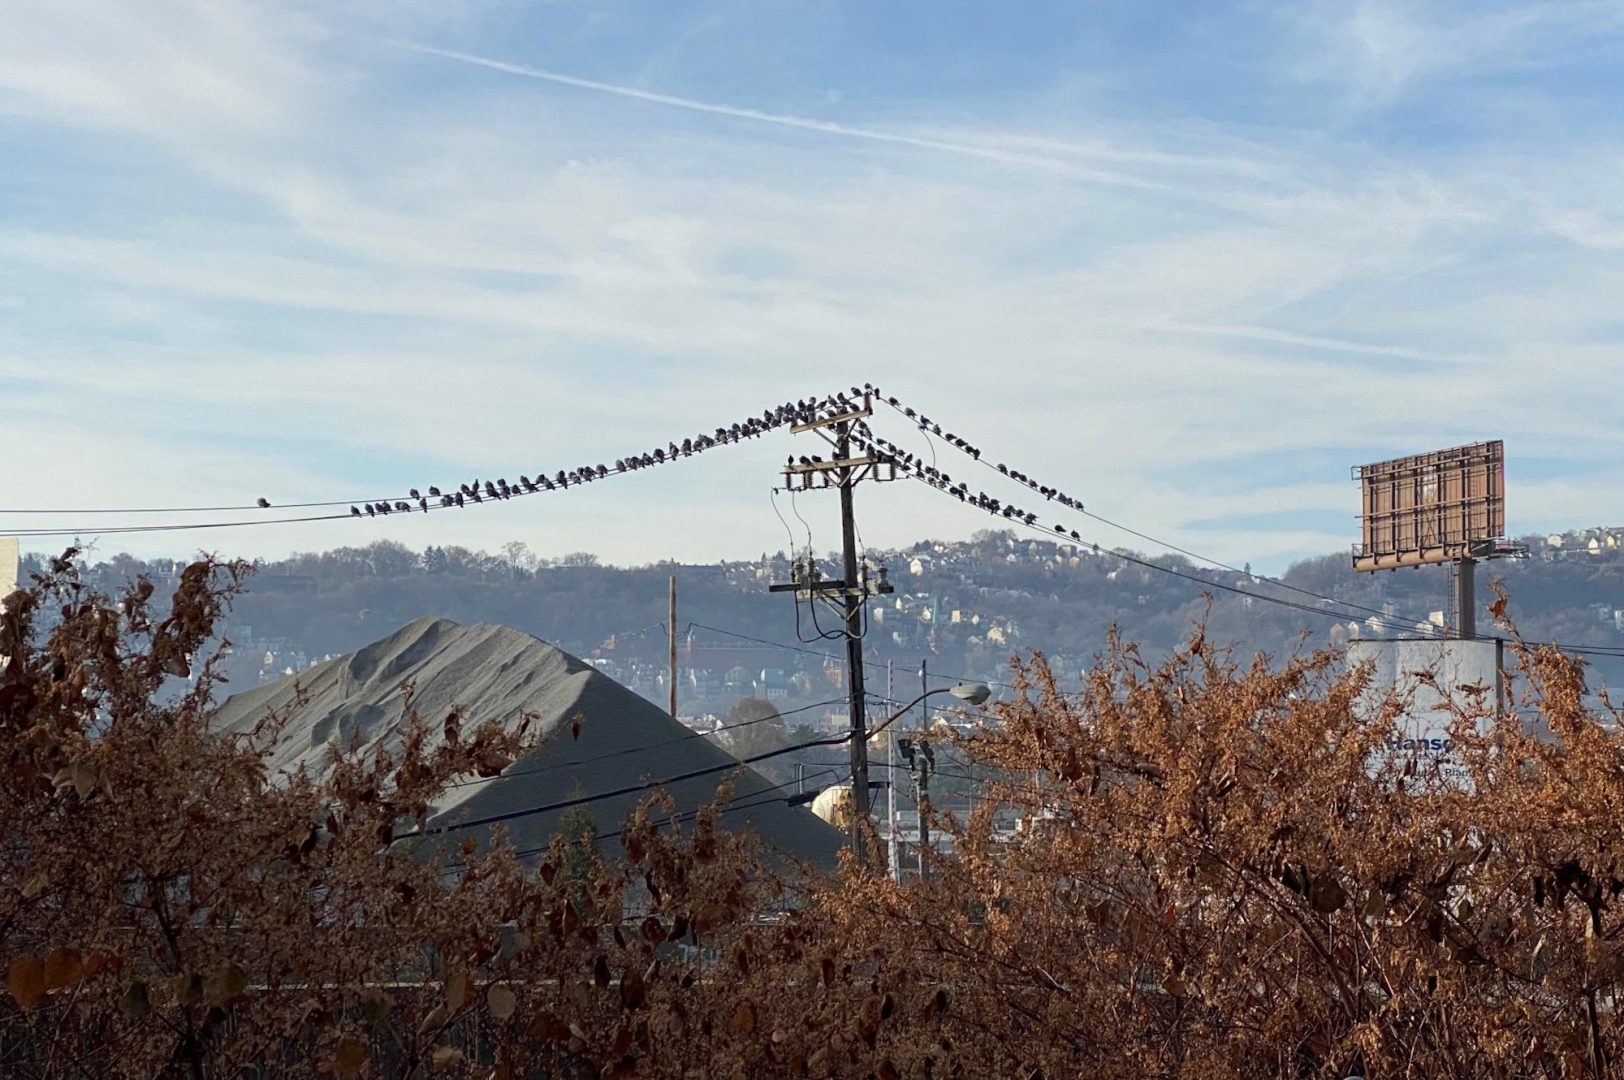 Birds on a telephone wire.